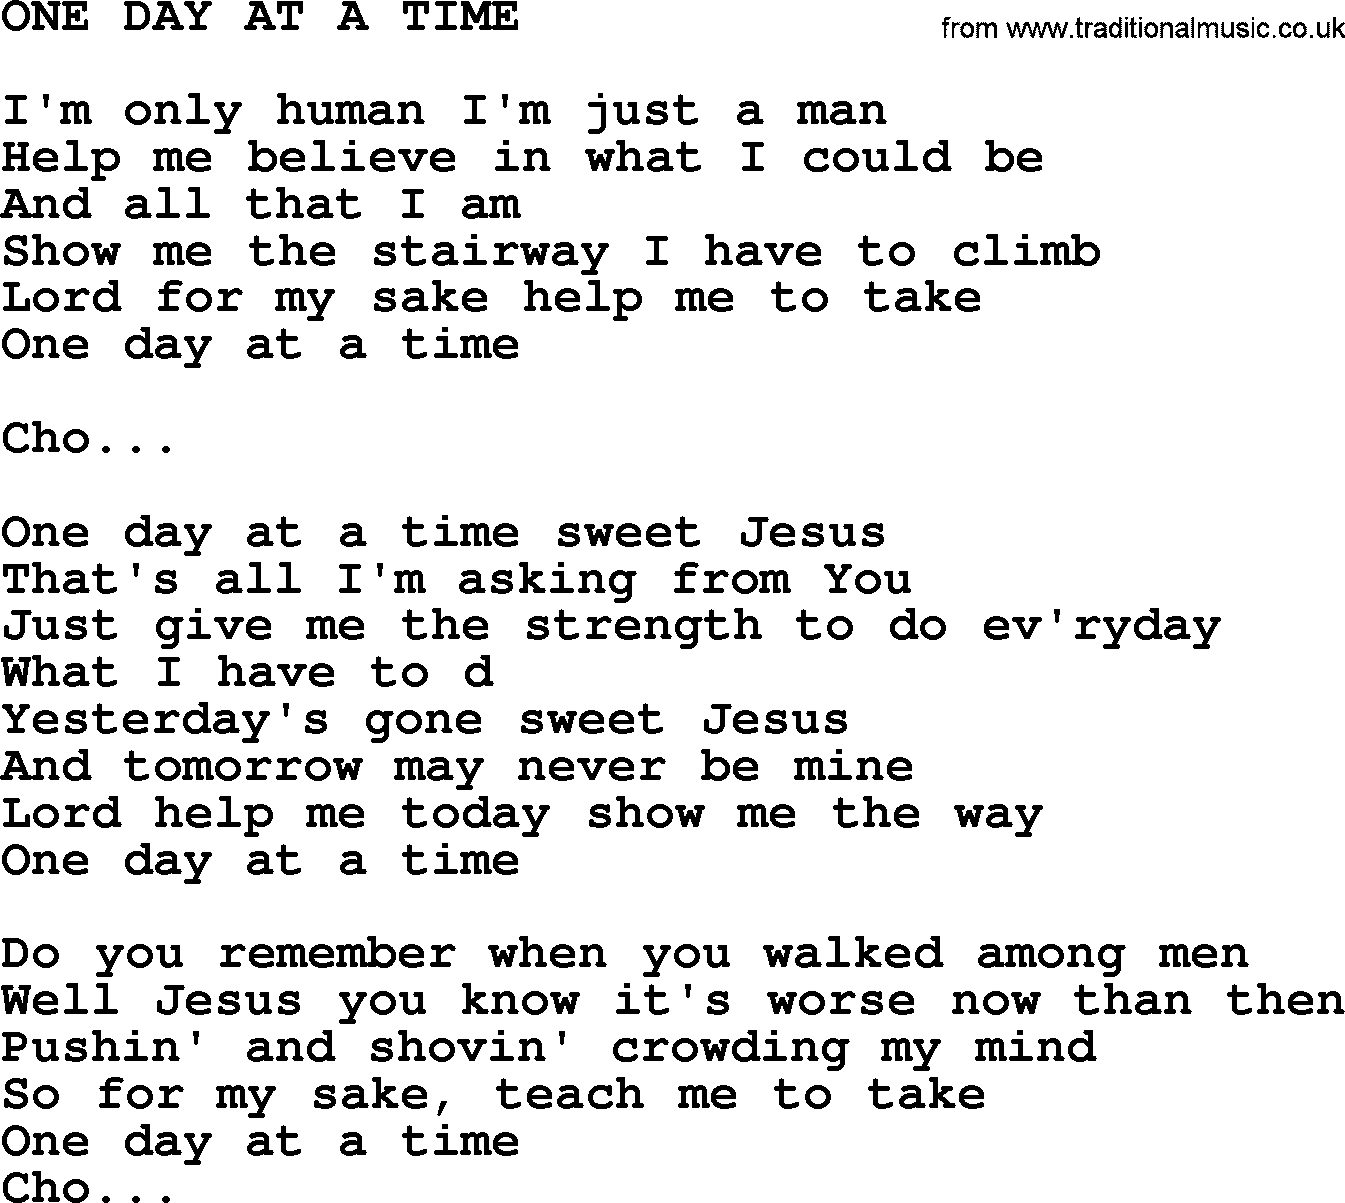 kris-kristofferson-song-one-day-at-a-time-txt-lyrics-and-chords